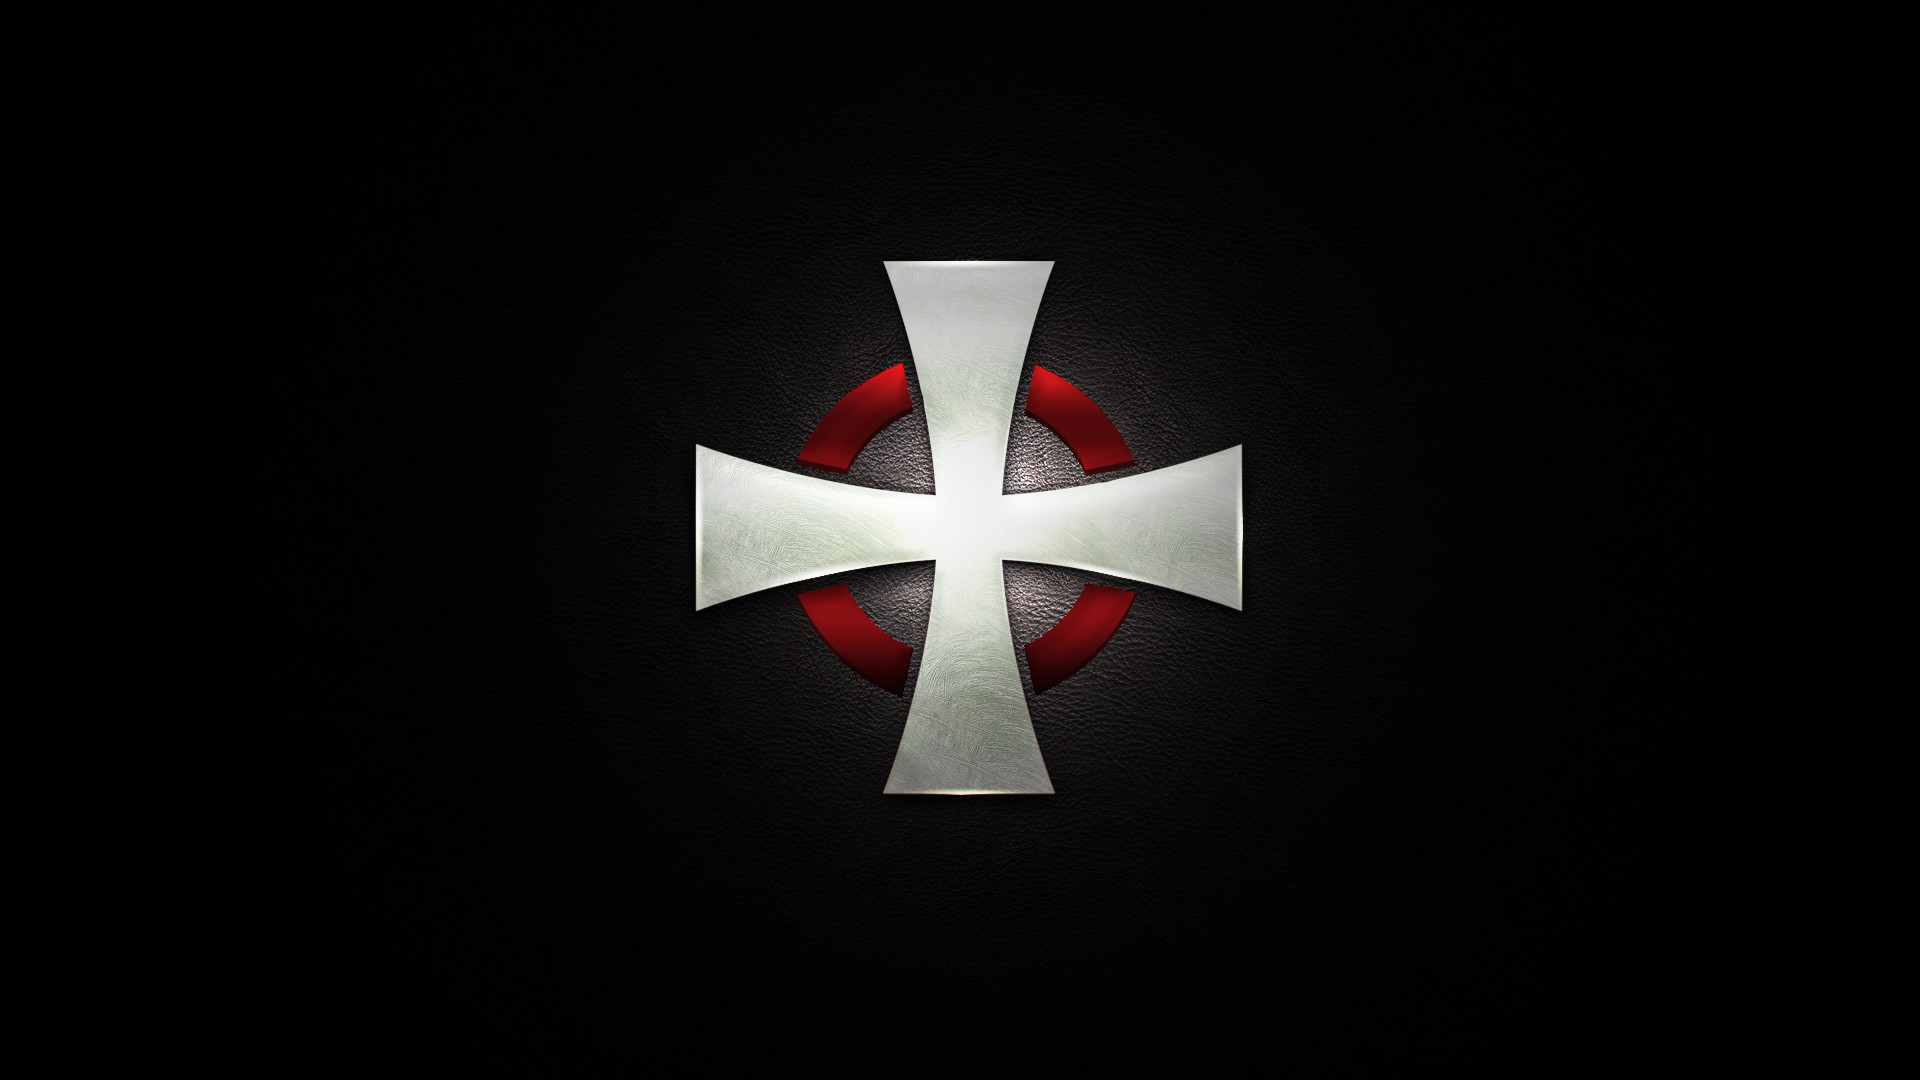 1920x1080 Explore World Wallpaper, Wallpaper Backgrounds, and more! Modern cross of  the Knights Templar.